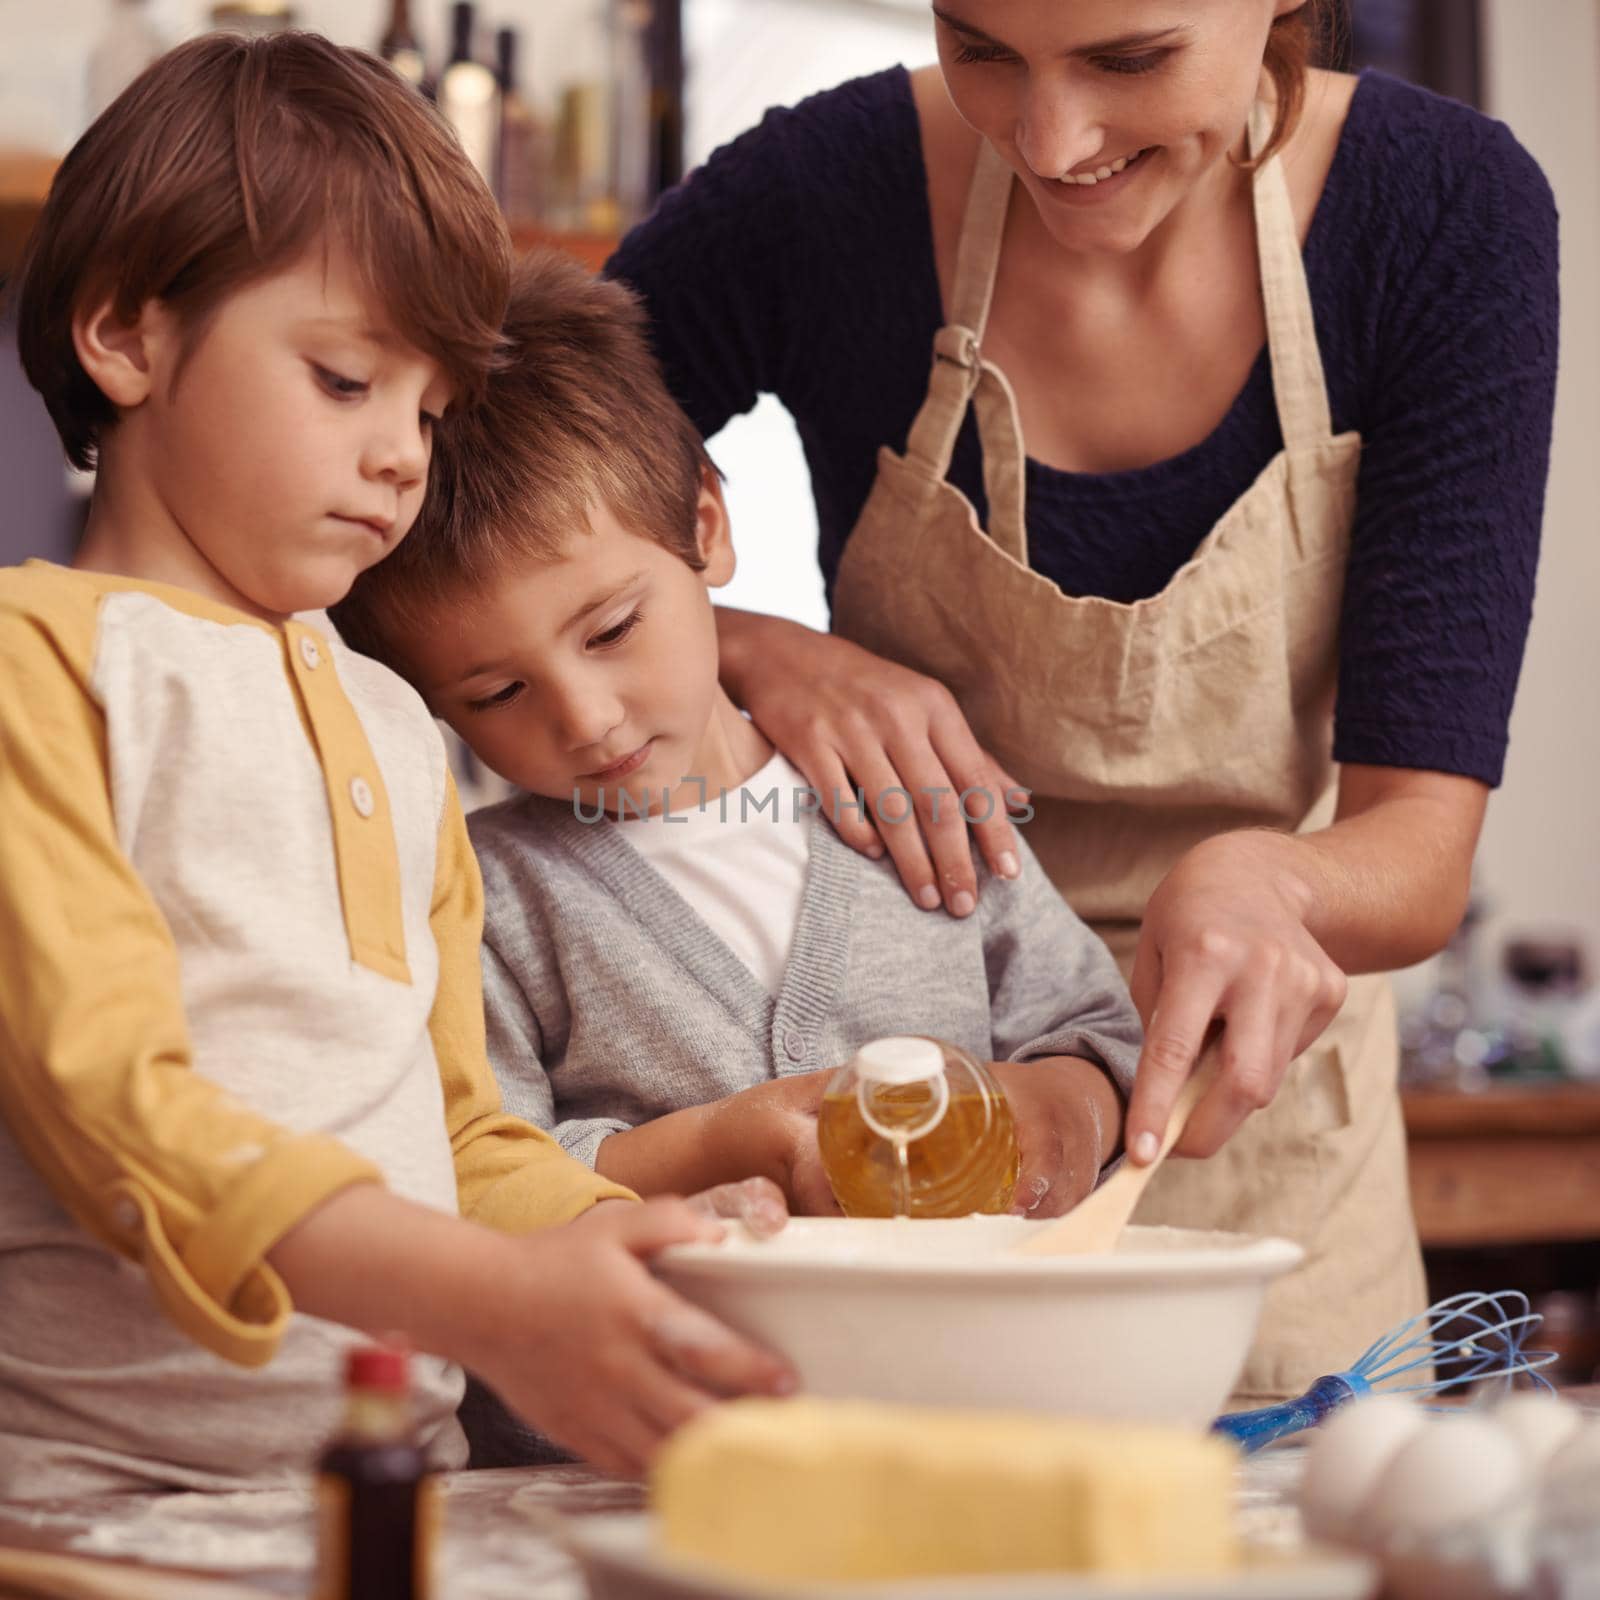 Two cute little boys baking with their mother in the kitchen.